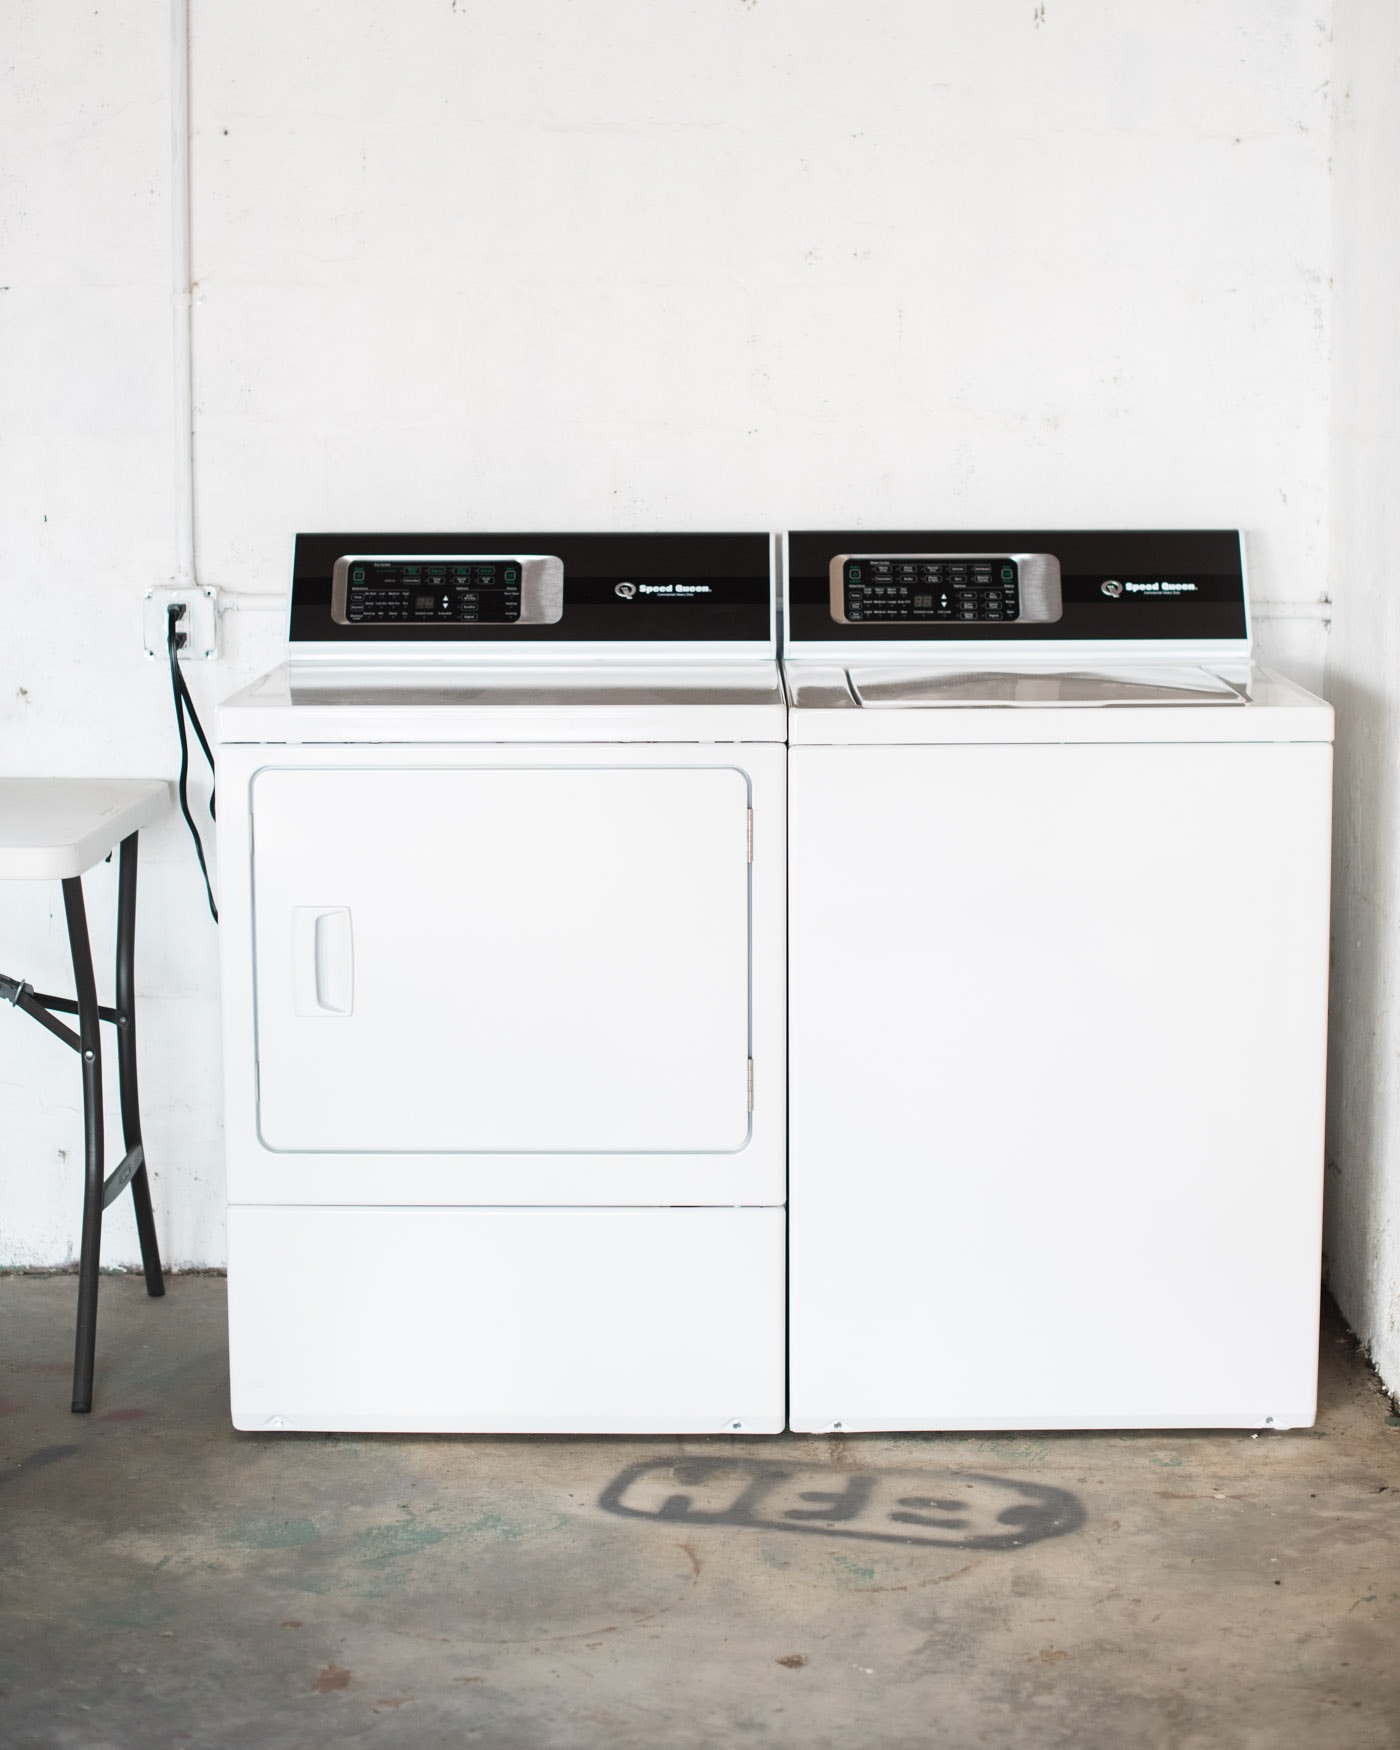 Speed Queen washer and dryer